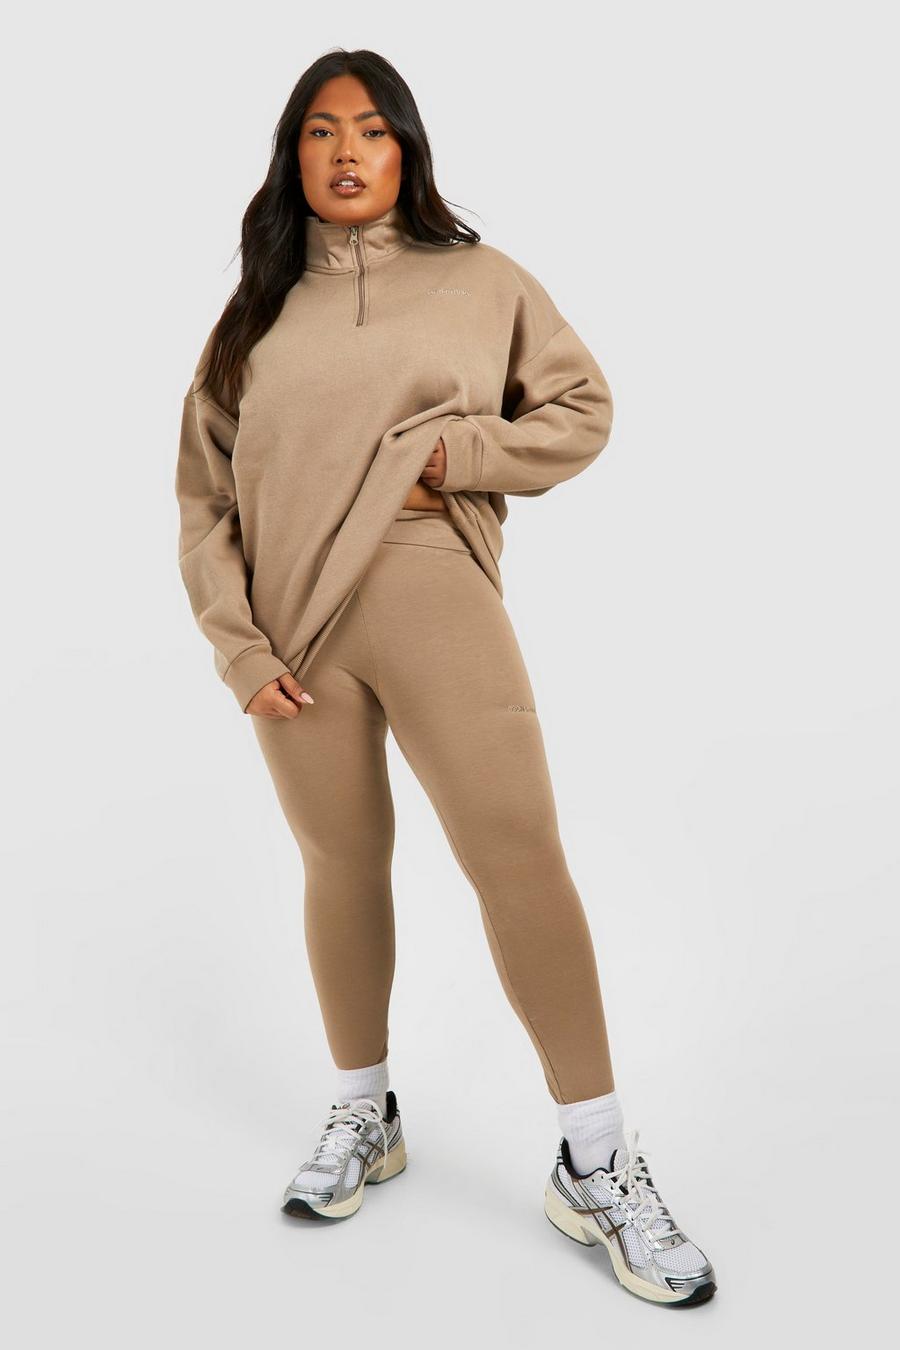 Dropship Plus Size Contrast Layer Solid Puff Sleeve Tops & Sweatpants Set; Women's  Plus Medium Stretch 2pcs Set Outfits to Sell Online at a Lower Price